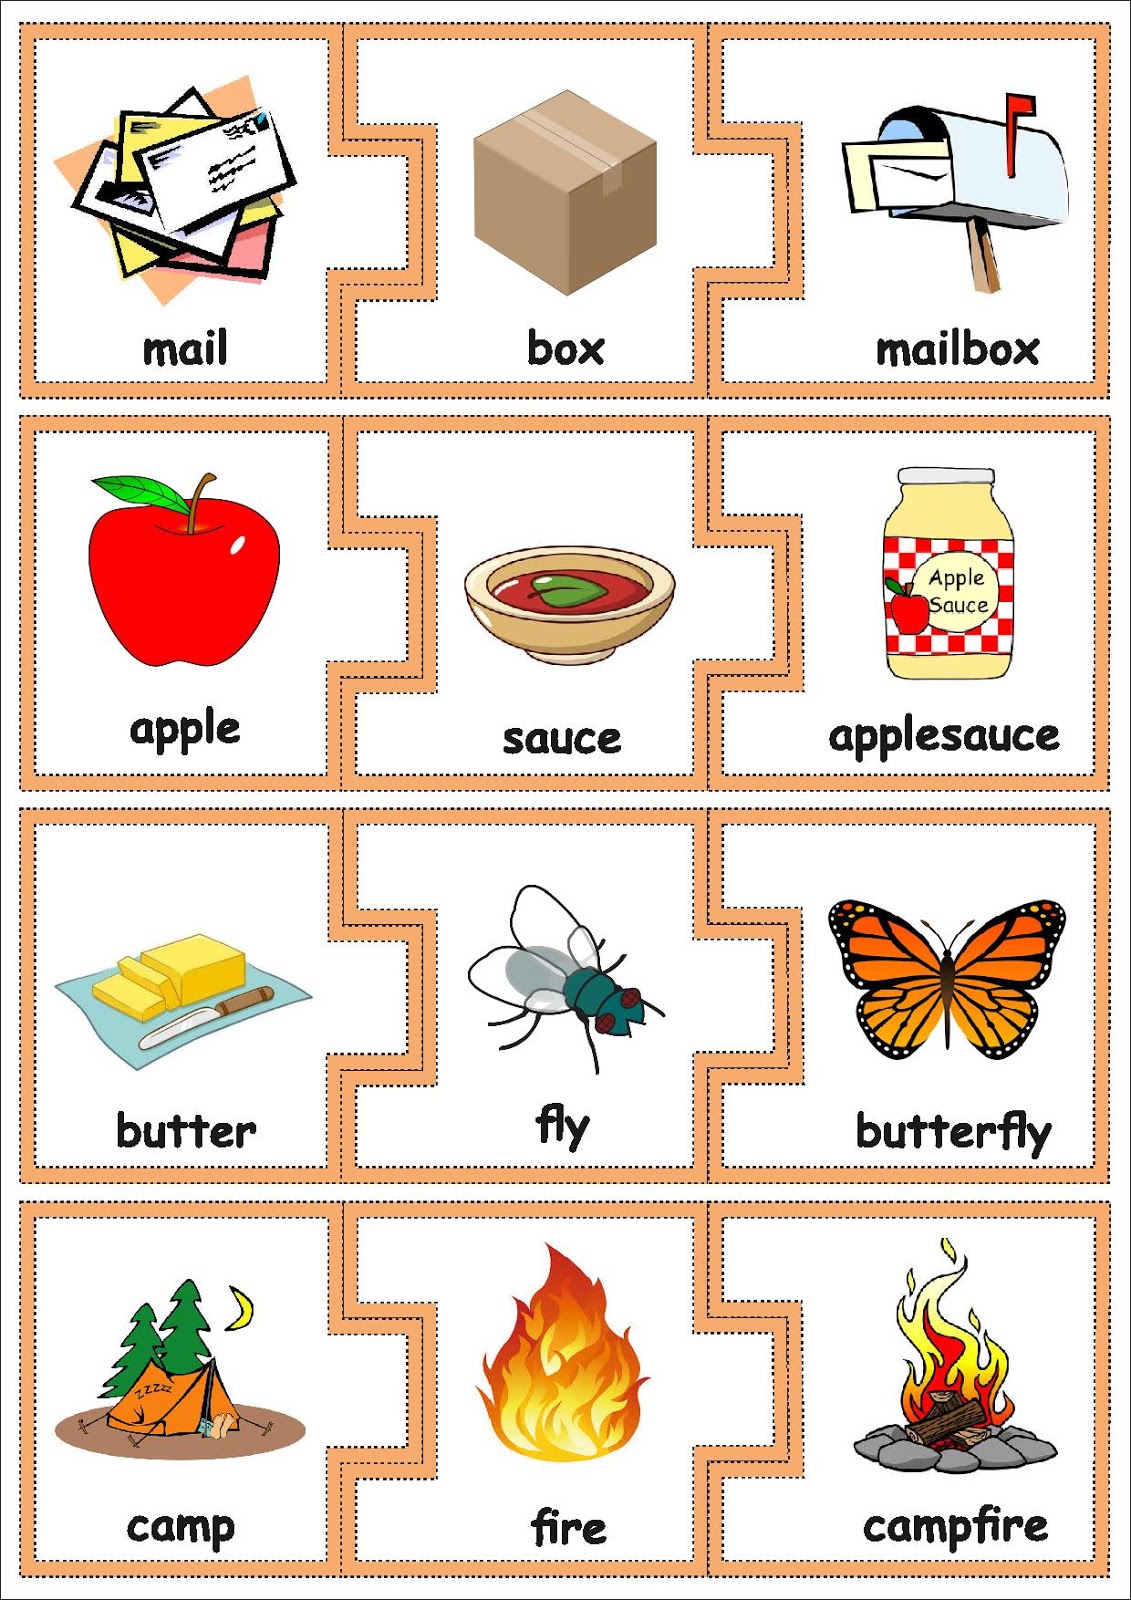 download-compound-word-puzzles-in-pdf-infomalay12-blogspot-info-malay